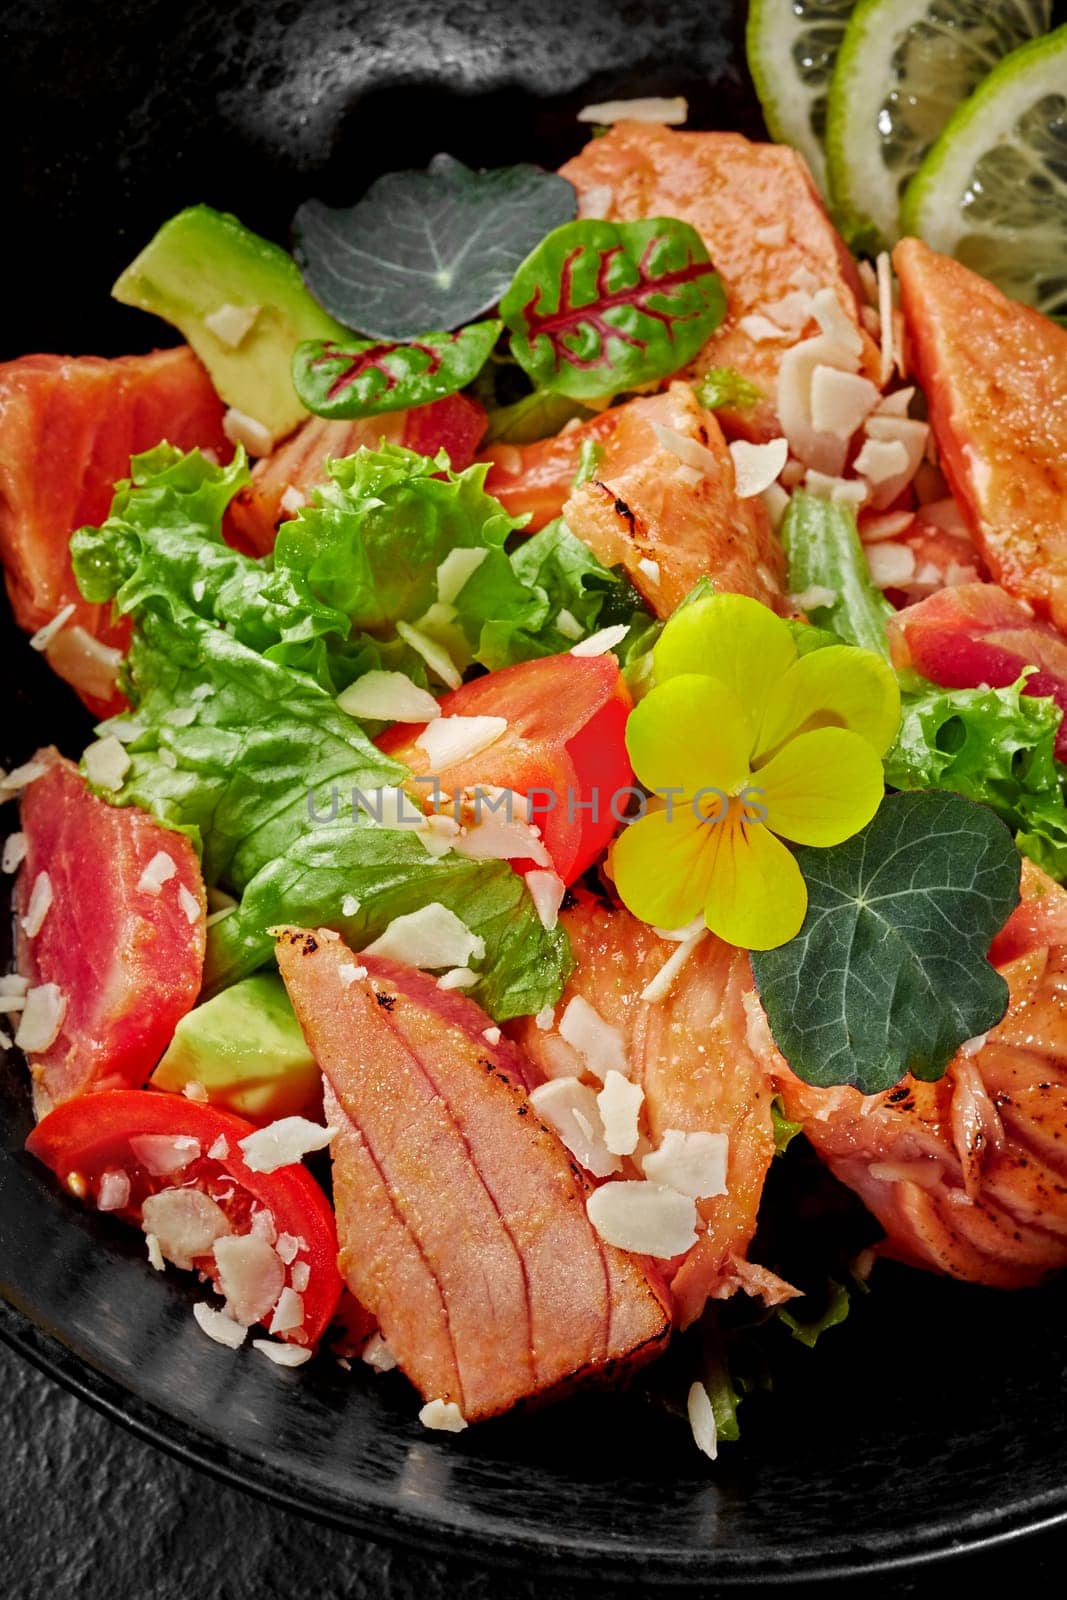 Seared ahi tuna salad with lettuce, tomatoes, avocado and Asian-style dressing by nazarovsergey